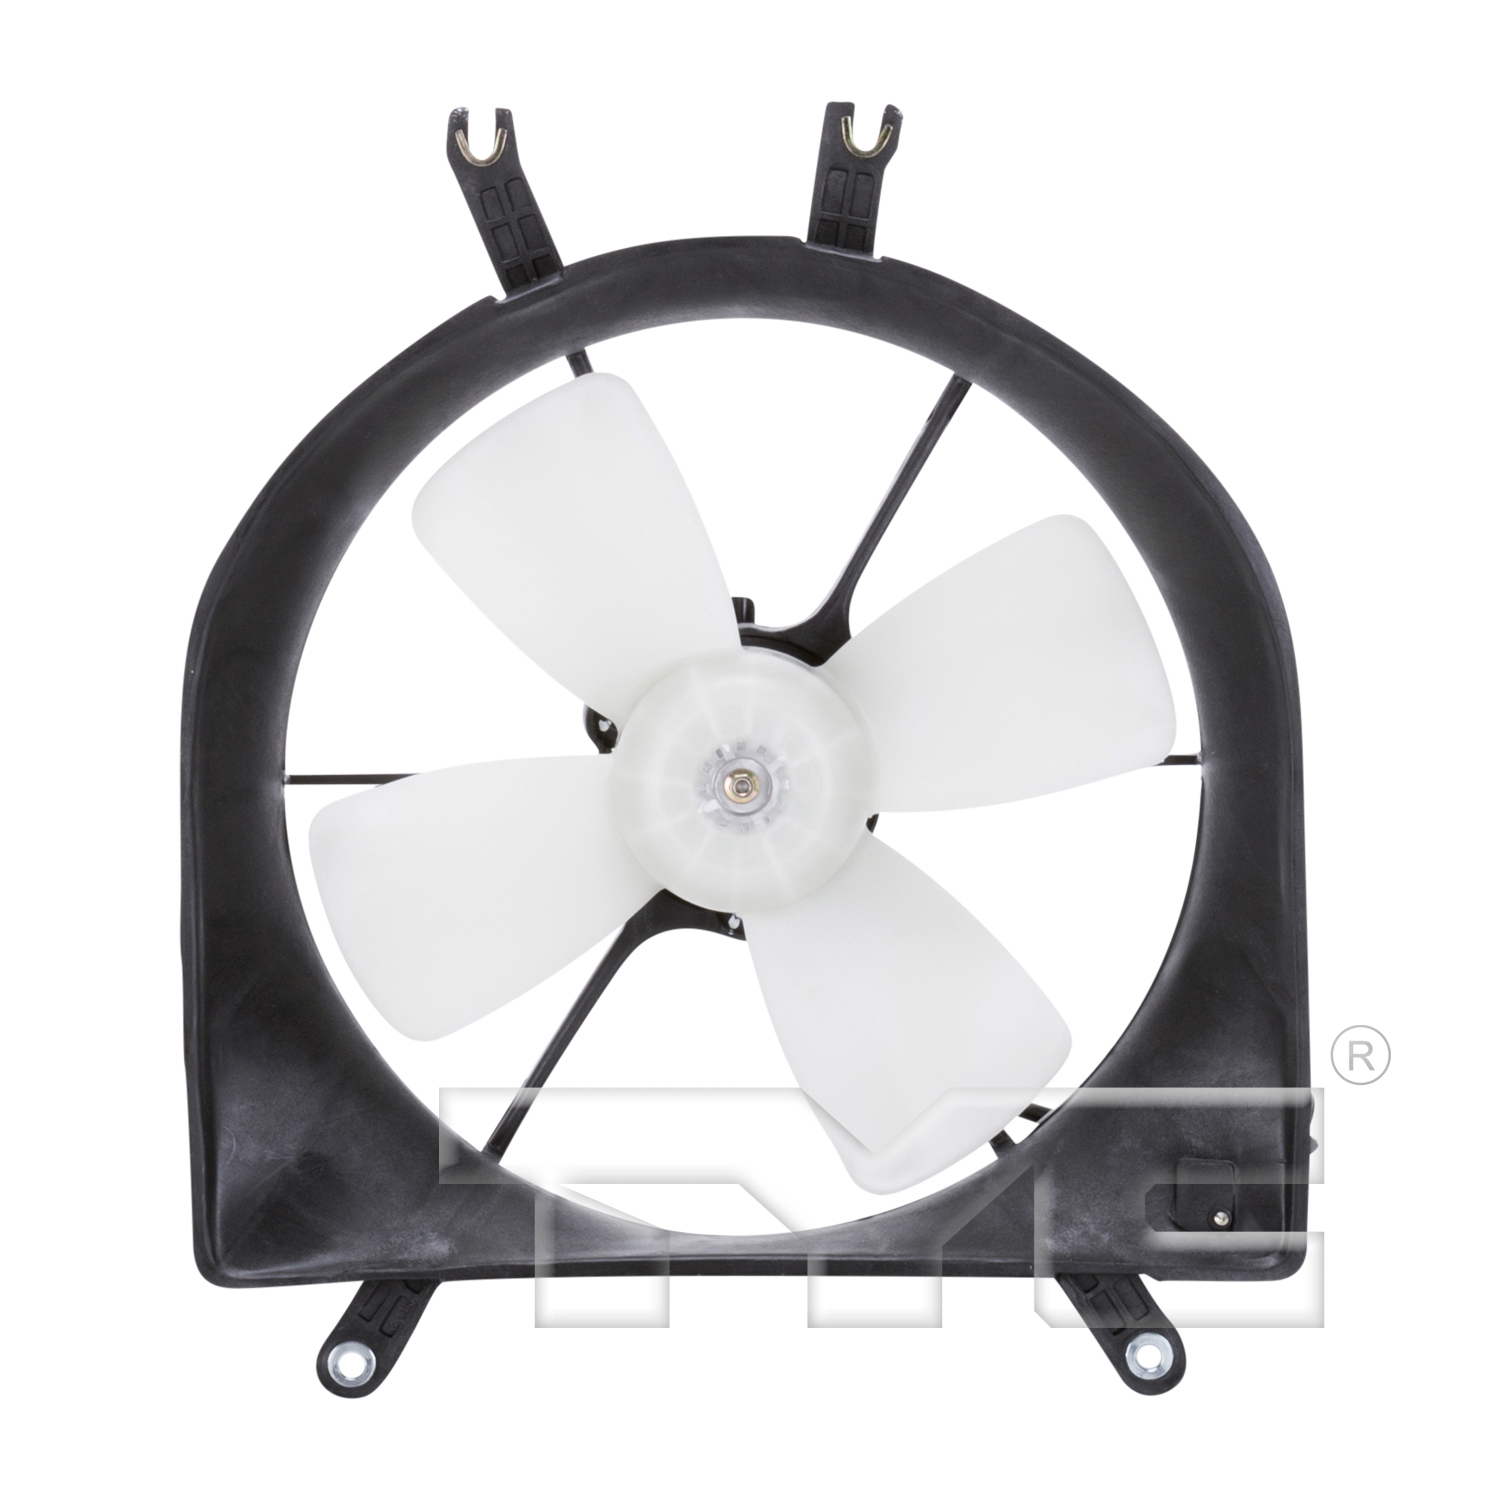 Aftermarket FAN ASSEMBLY/FAN SHROUDS for HONDA - CIVIC, CIVIC,92-97,Radiator cooling fan assy